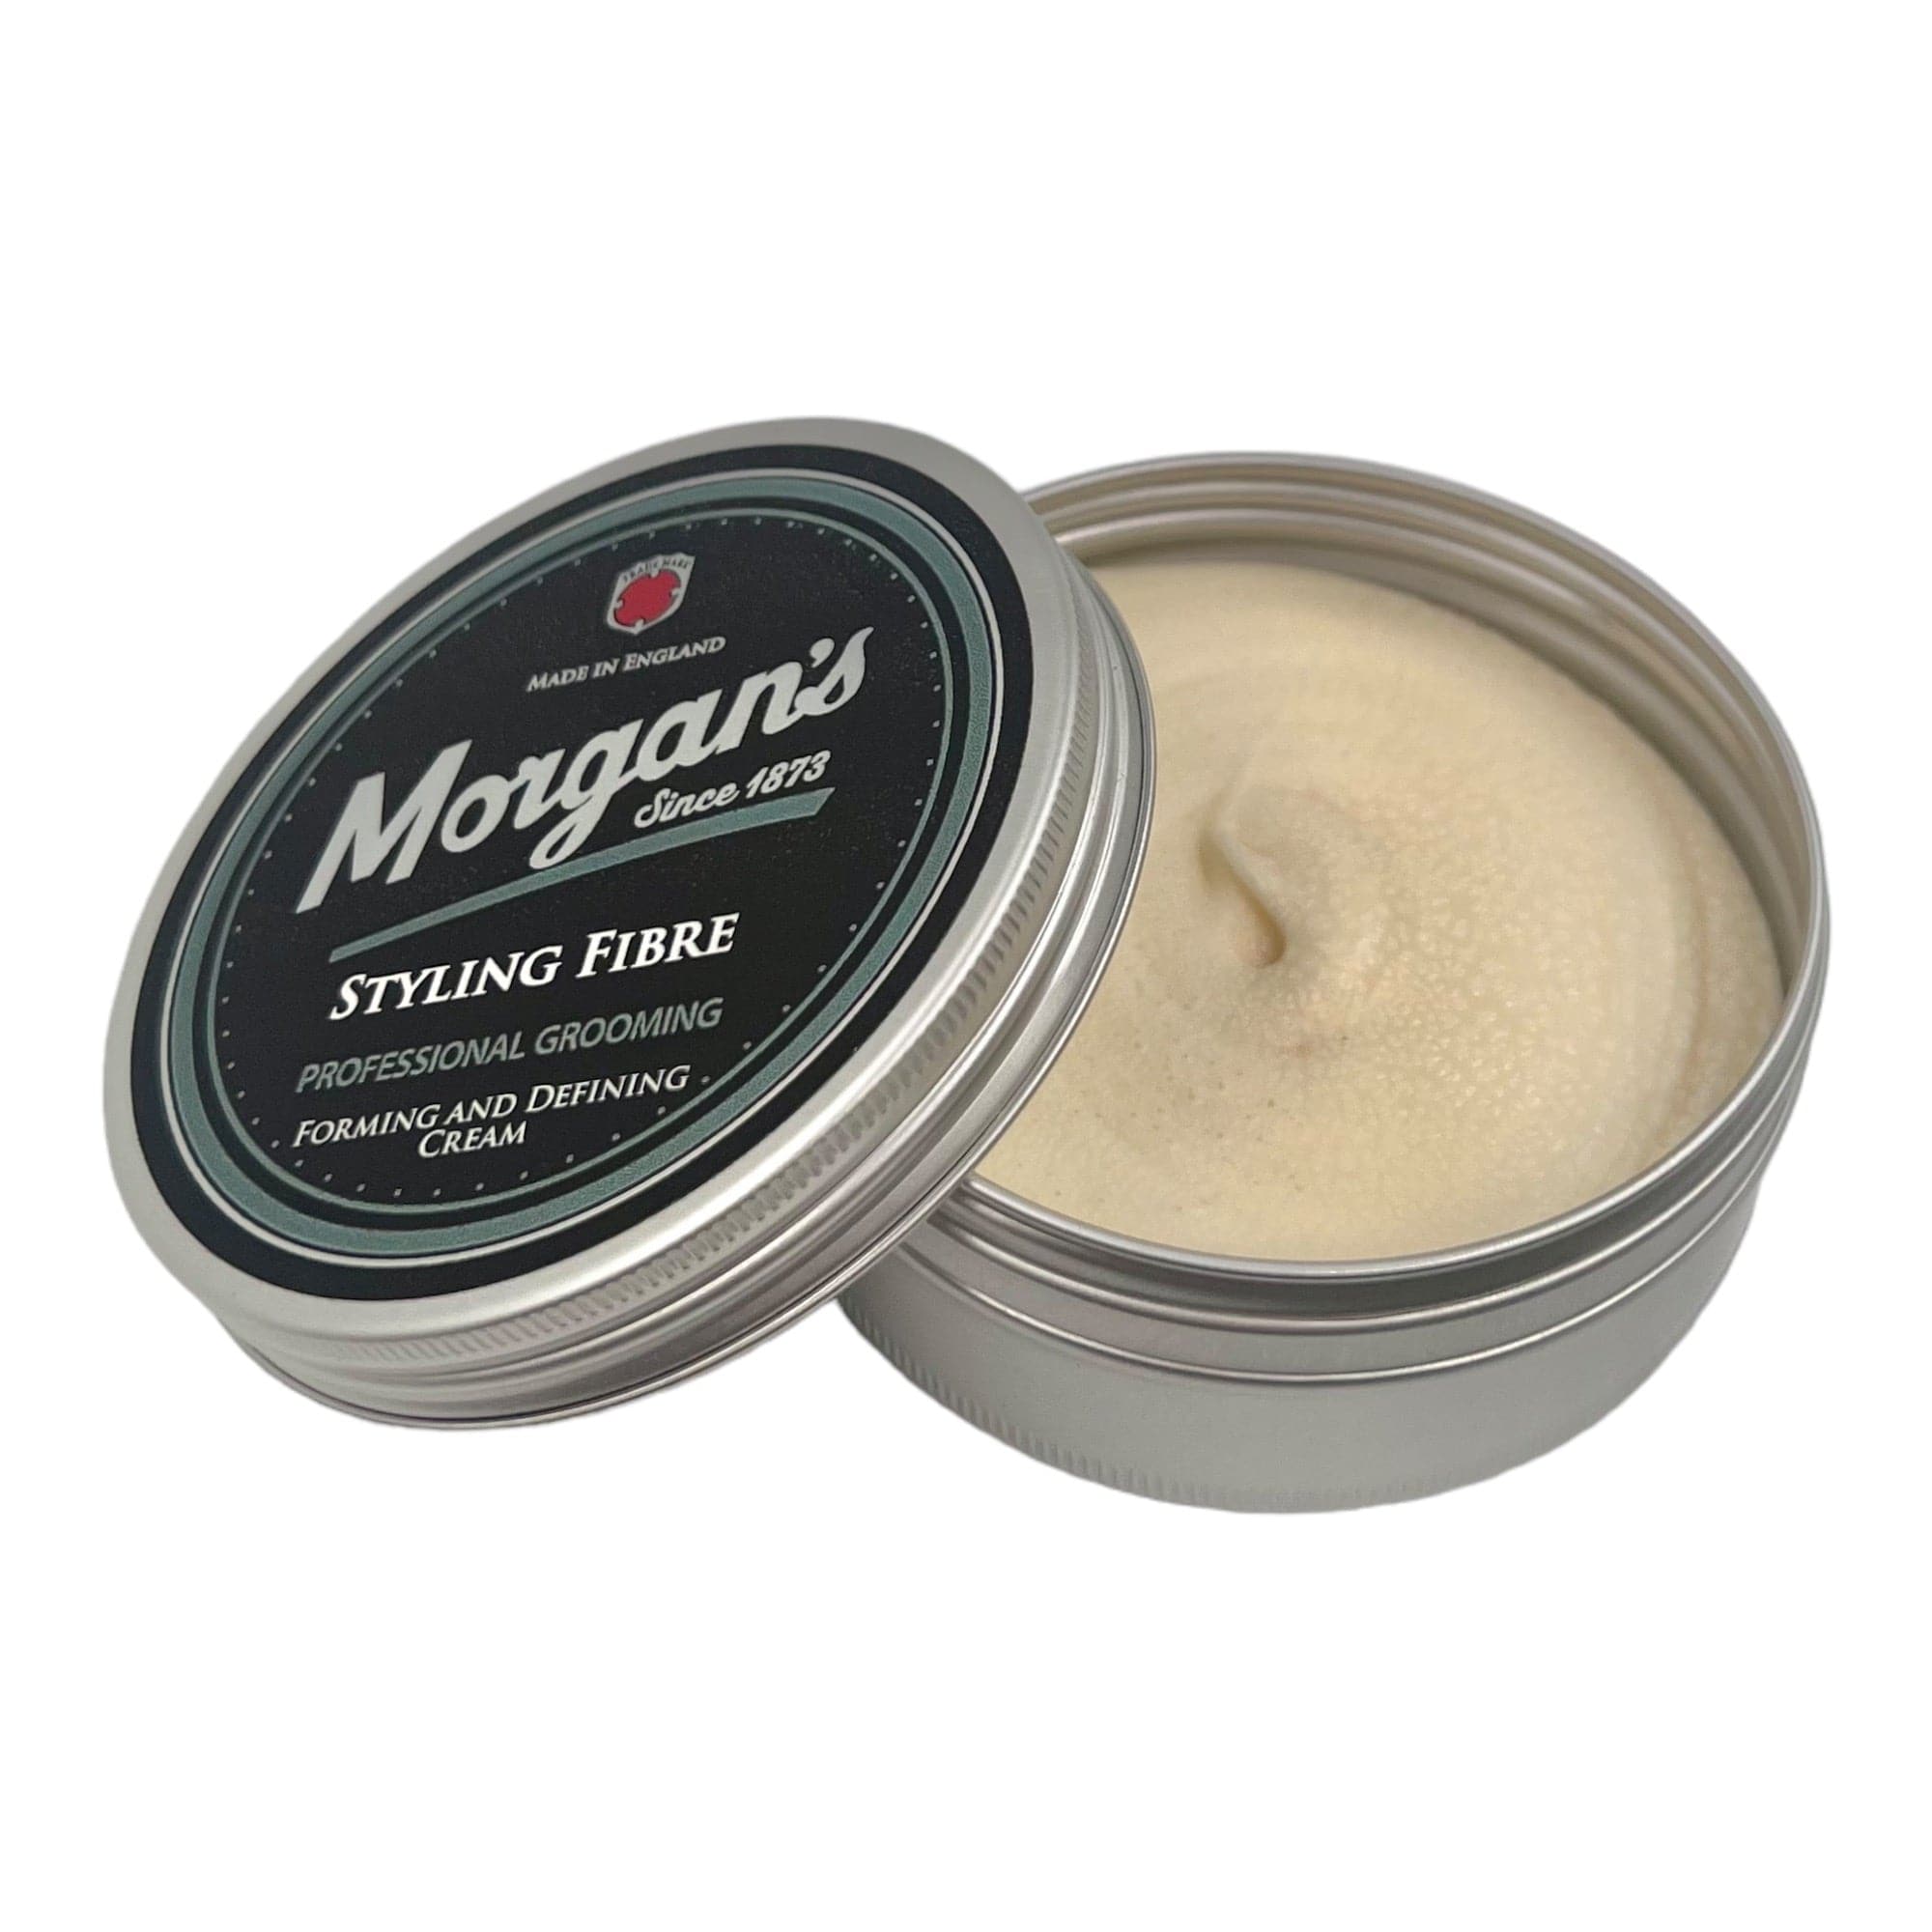 Morgan's - Styling Fibre Forming and Defining Cream 75ml